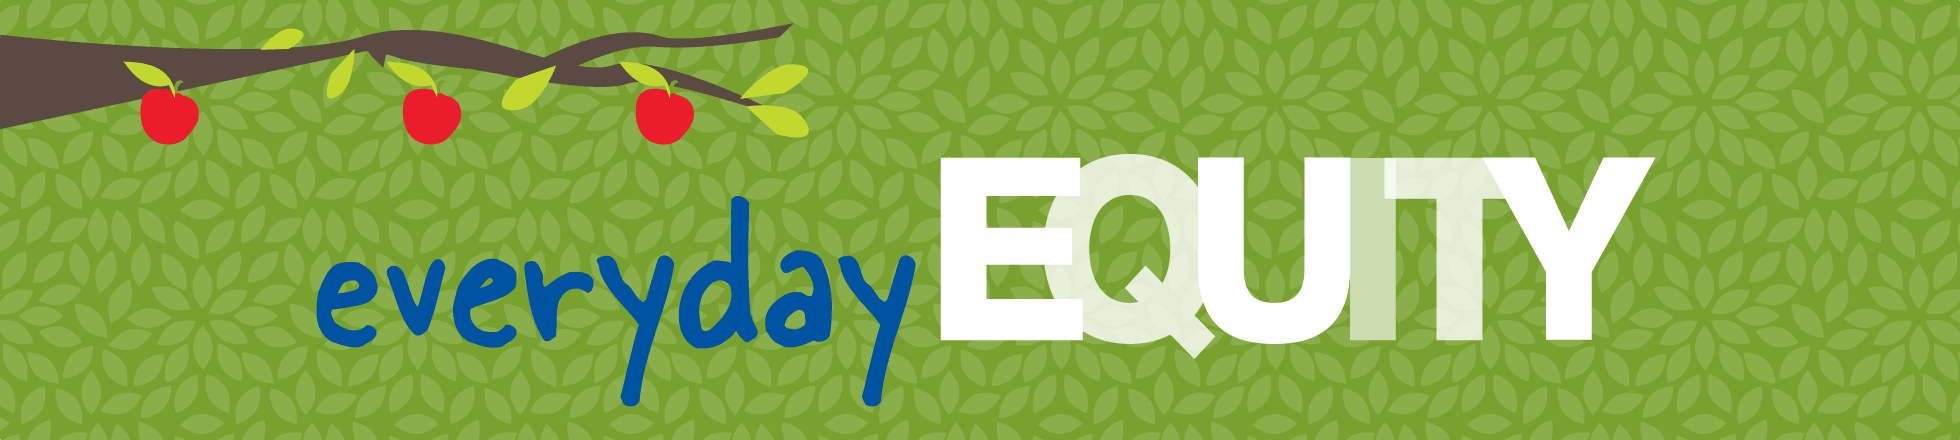 Everyday Equity banner